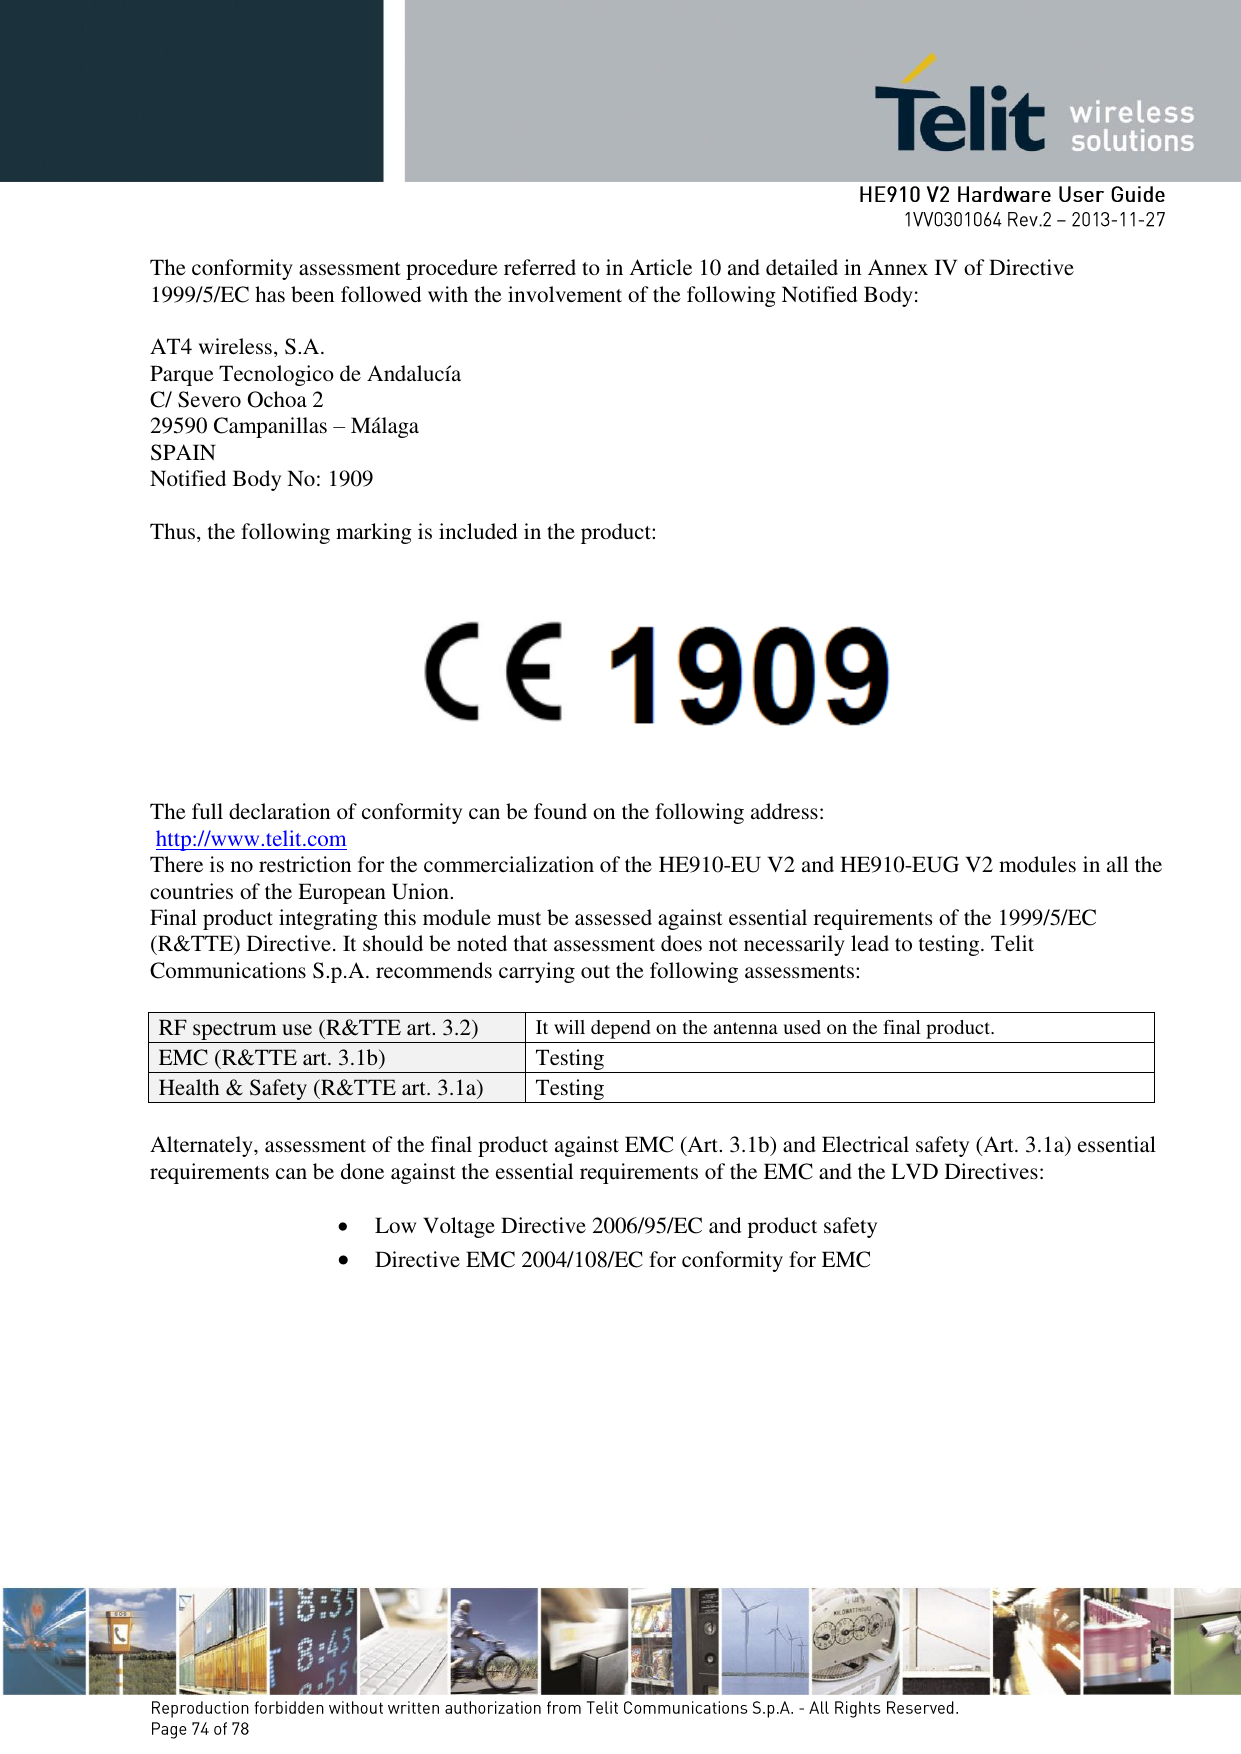       The conformity assessment procedure referred to in Article 10 and detailed in Annex IV of Directive 1999/5/EC has been followed with the involvement of the following Notified Body:   AT4 wireless, S.A. Parque Tecnologico de Andalucía C/ Severo Ochoa 2 29590 Campanillas – Málaga SPAIN Notified Body No: 1909  Thus, the following marking is included in the product:      The full declaration of conformity can be found on the following address:  http://www.telit.com There is no restriction for the commercialization of the HE910-EU V2 and HE910-EUG V2 modules in all the countries of the European Union. Final product integrating this module must be assessed against essential requirements of the 1999/5/EC (R&amp;TTE) Directive. It should be noted that assessment does not necessarily lead to testing. Telit Communications S.p.A. recommends carrying out the following assessments:  RF spectrum use (R&amp;TTE art. 3.2) It will depend on the antenna used on the final product. EMC (R&amp;TTE art. 3.1b) Testing Health &amp; Safety (R&amp;TTE art. 3.1a) Testing  Alternately, assessment of the final product against EMC (Art. 3.1b) and Electrical safety (Art. 3.1a) essential requirements can be done against the essential requirements of the EMC and the LVD Directives:   Low Voltage Directive 2006/95/EC and product safety   Directive EMC 2004/108/EC for conformity for EMC 